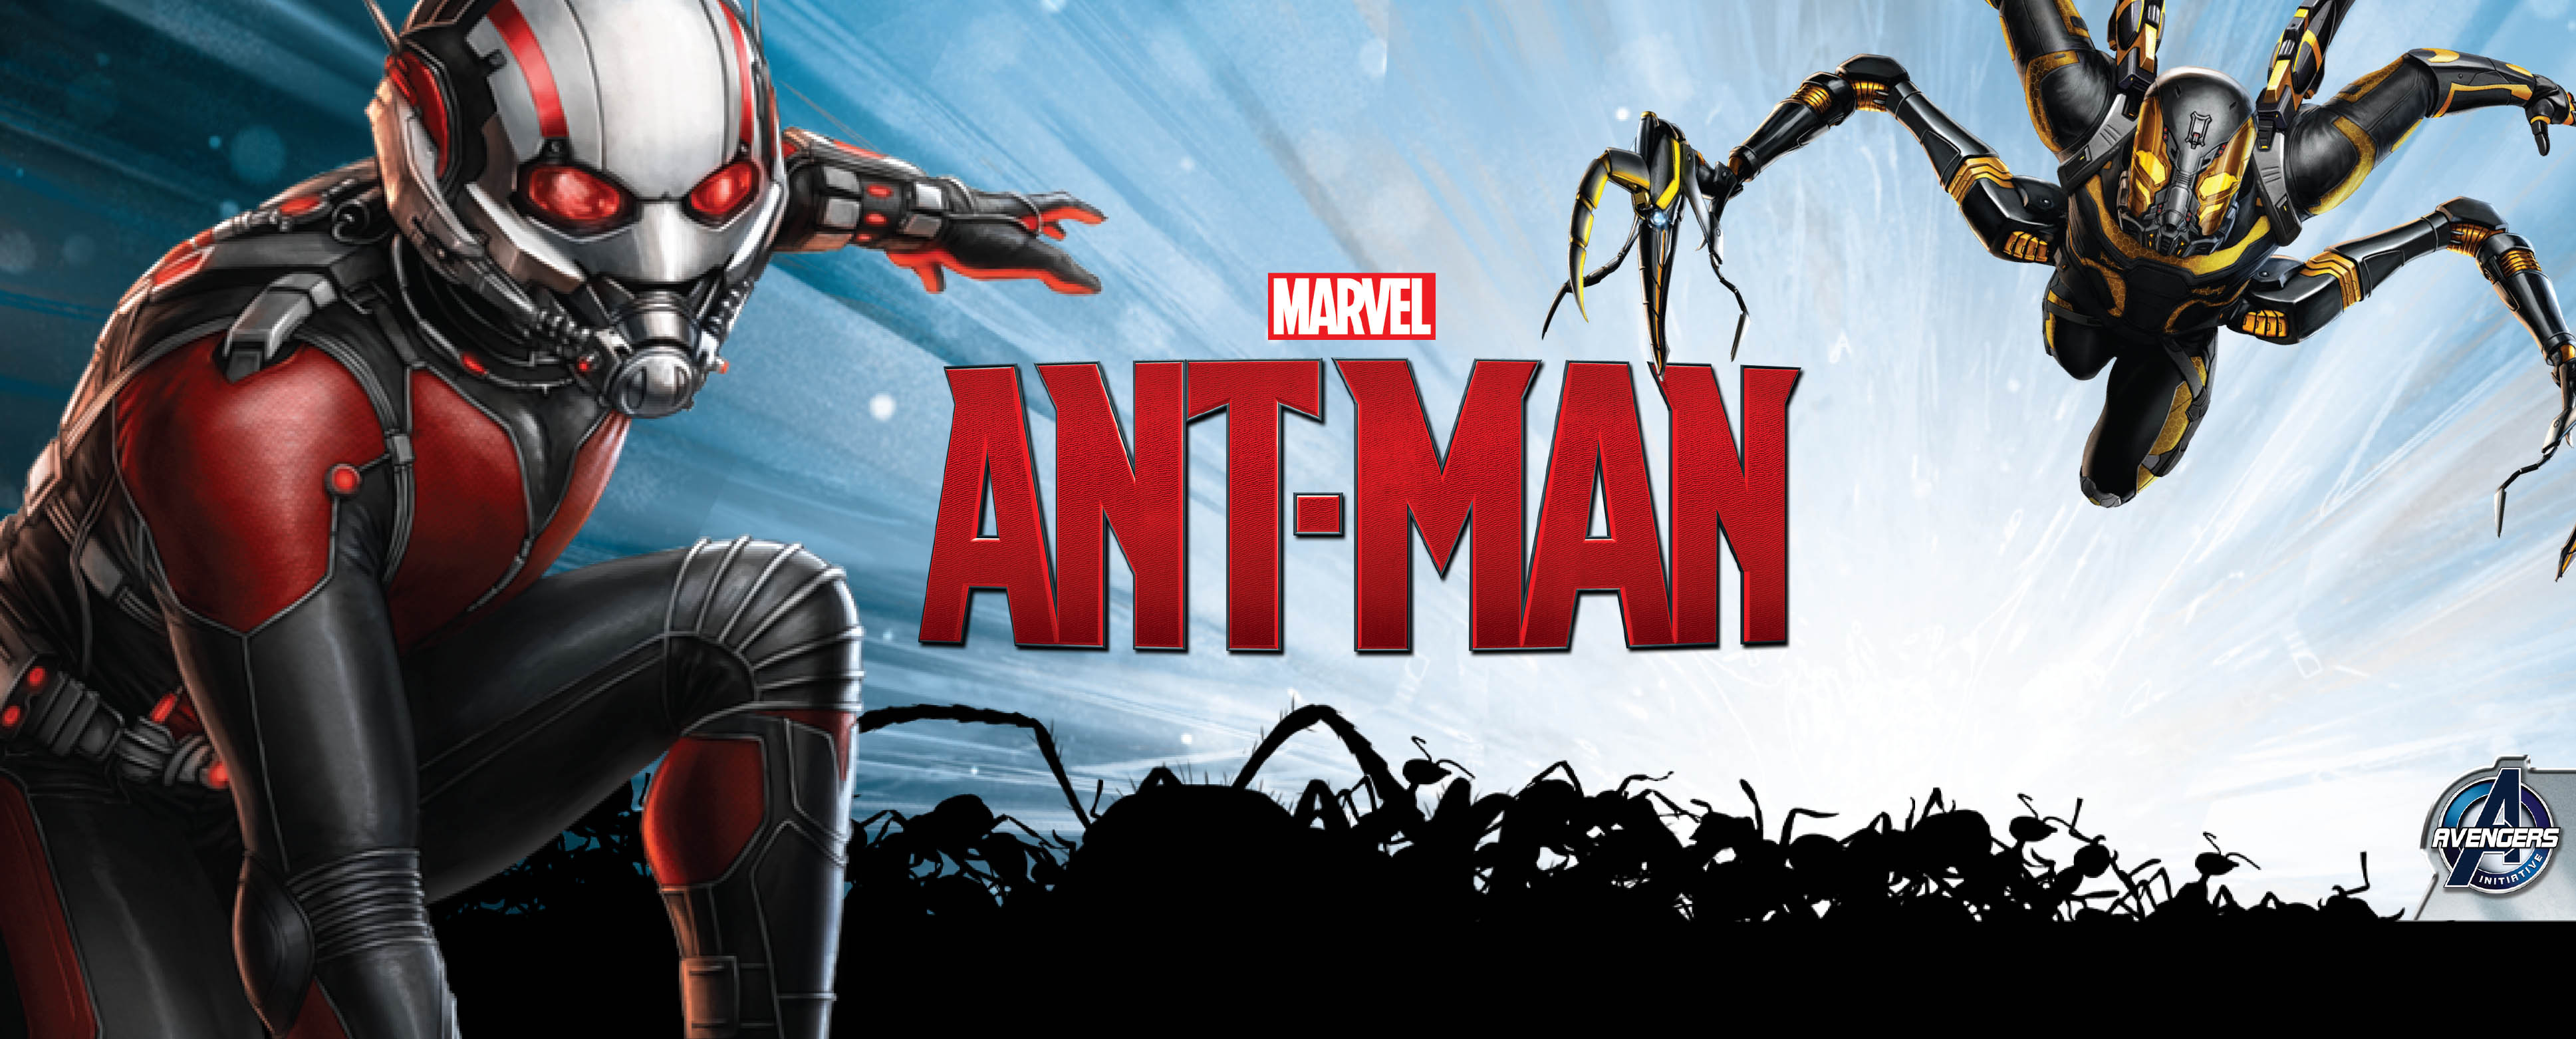 ant-man-is-a-mesmerizing-entertainer